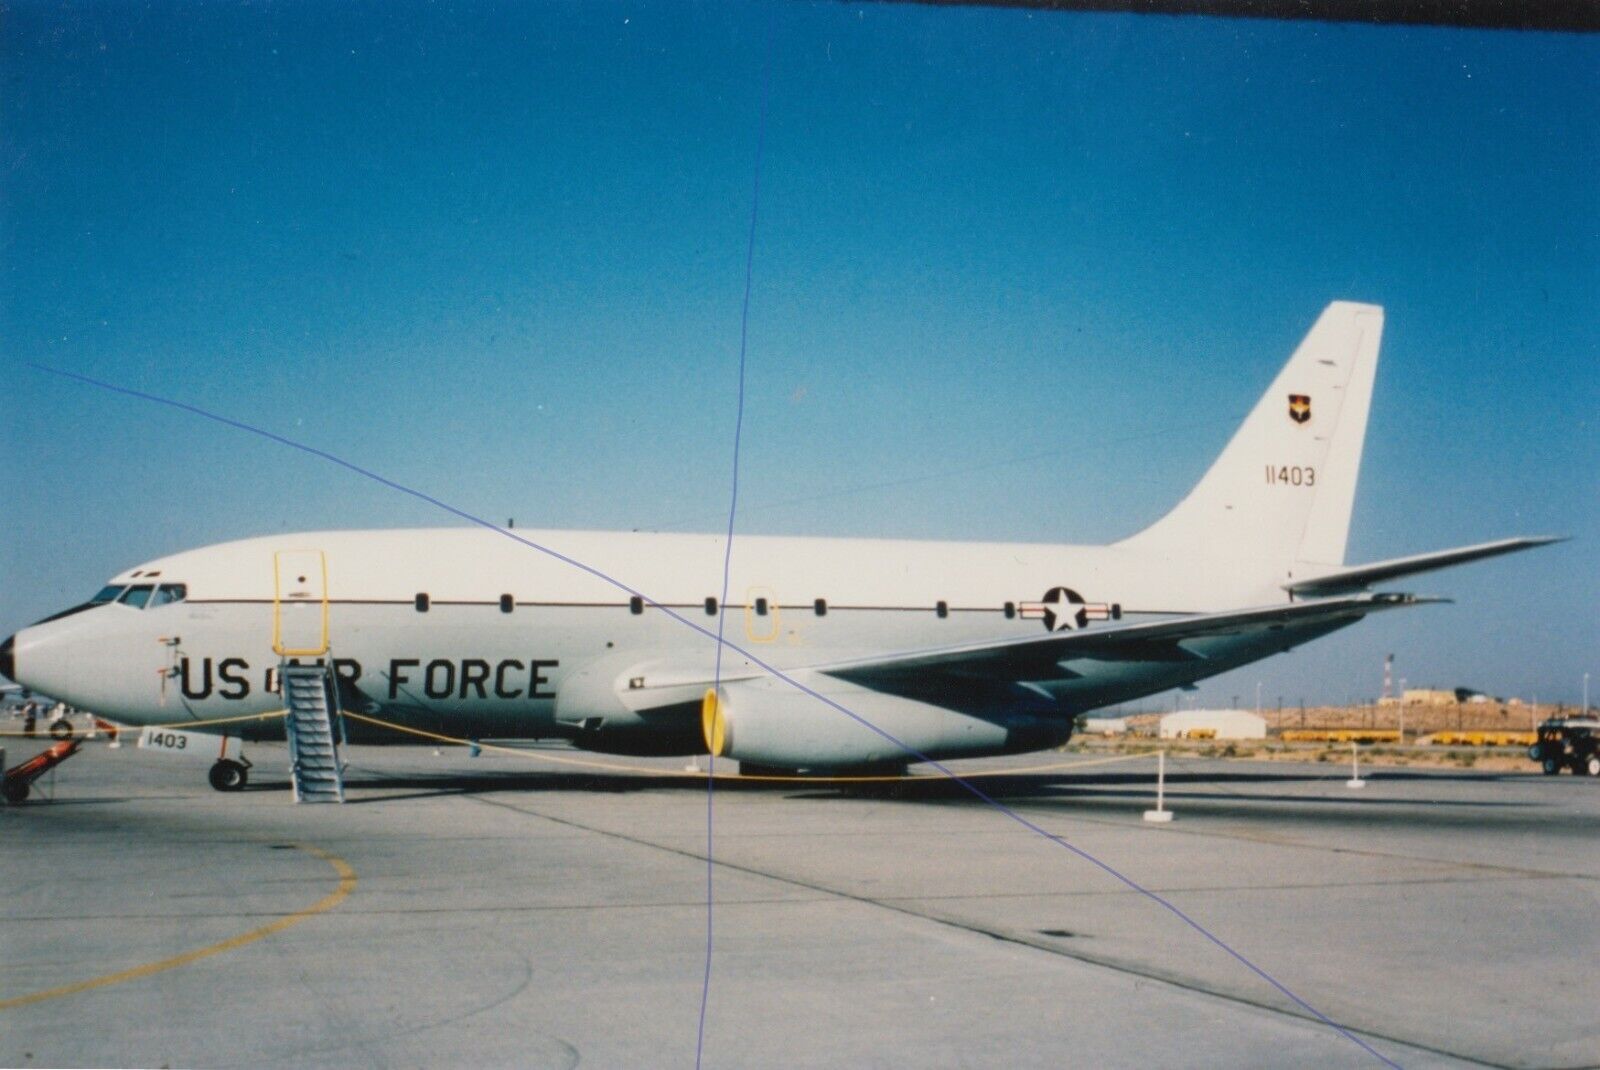 MILITARY AIRCRAFT PLANE PHOTO PHOTOGRAPH US AIR FORCE PICTURE BOEING 737 11403.